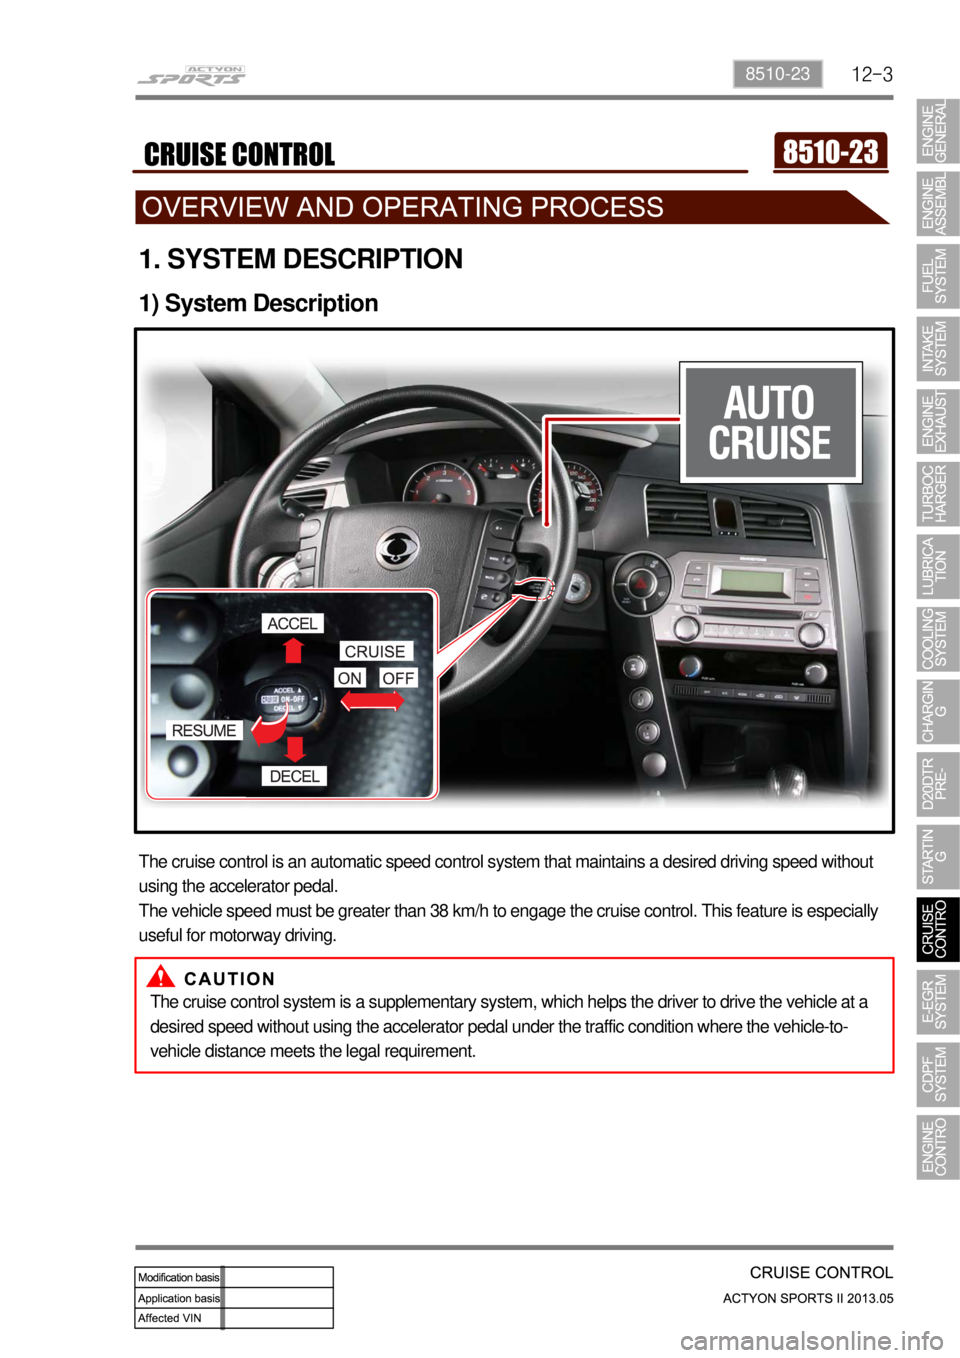 SSANGYONG NEW ACTYON SPORTS 2013  Service Manual 12-38510-23
1. SYSTEM DESCRIPTION
1) System Description
The cruise control is an automatic speed control system that maintains a desired driving speed without 
using the accelerator pedal.
The vehicle